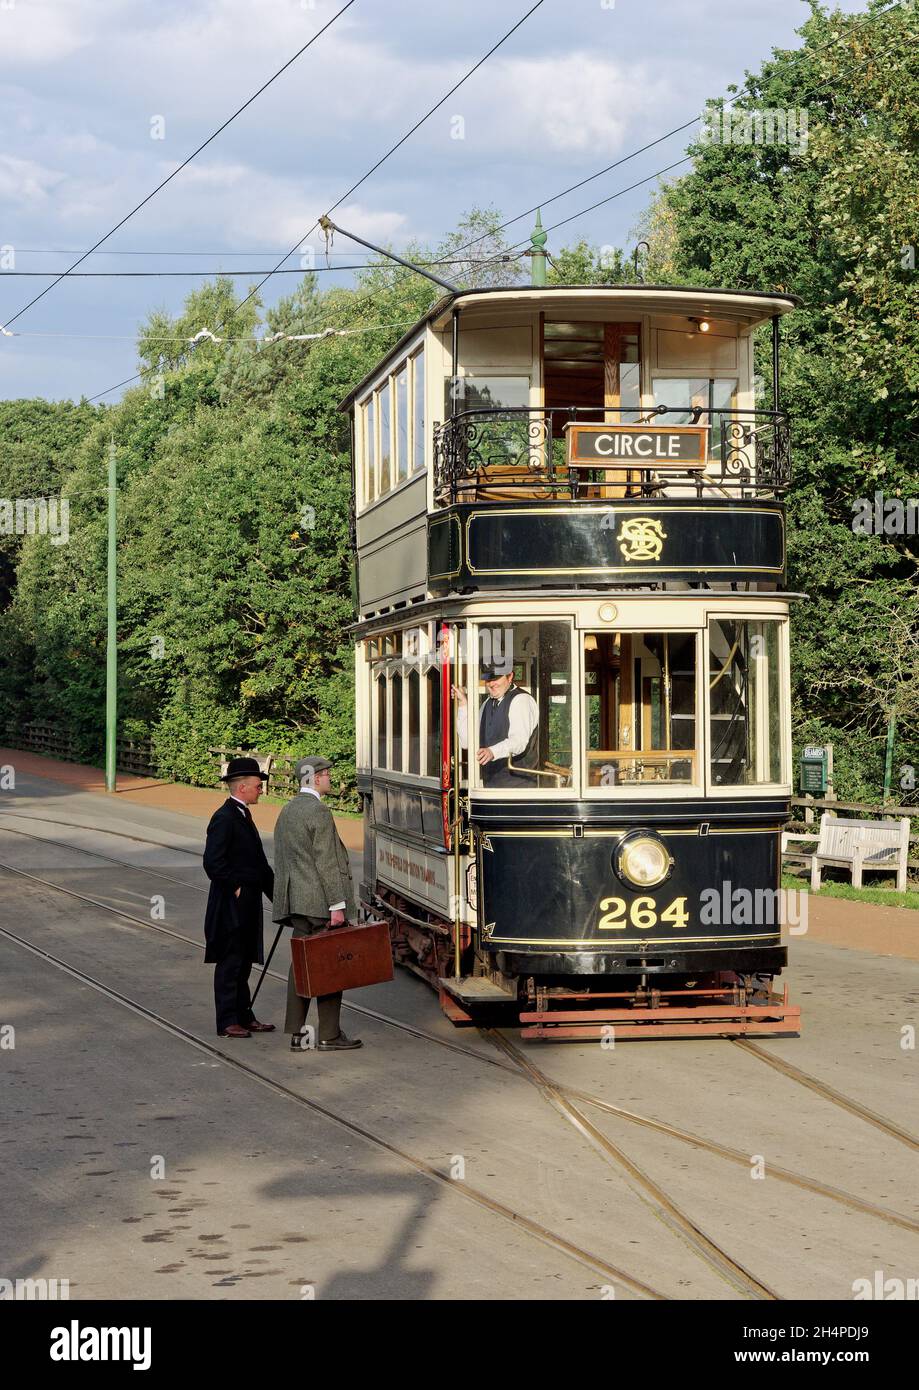 Restored former Sheffield tram car at a stop on the tramway system at Beamish Museum with passengers in period costume. Stock Photo